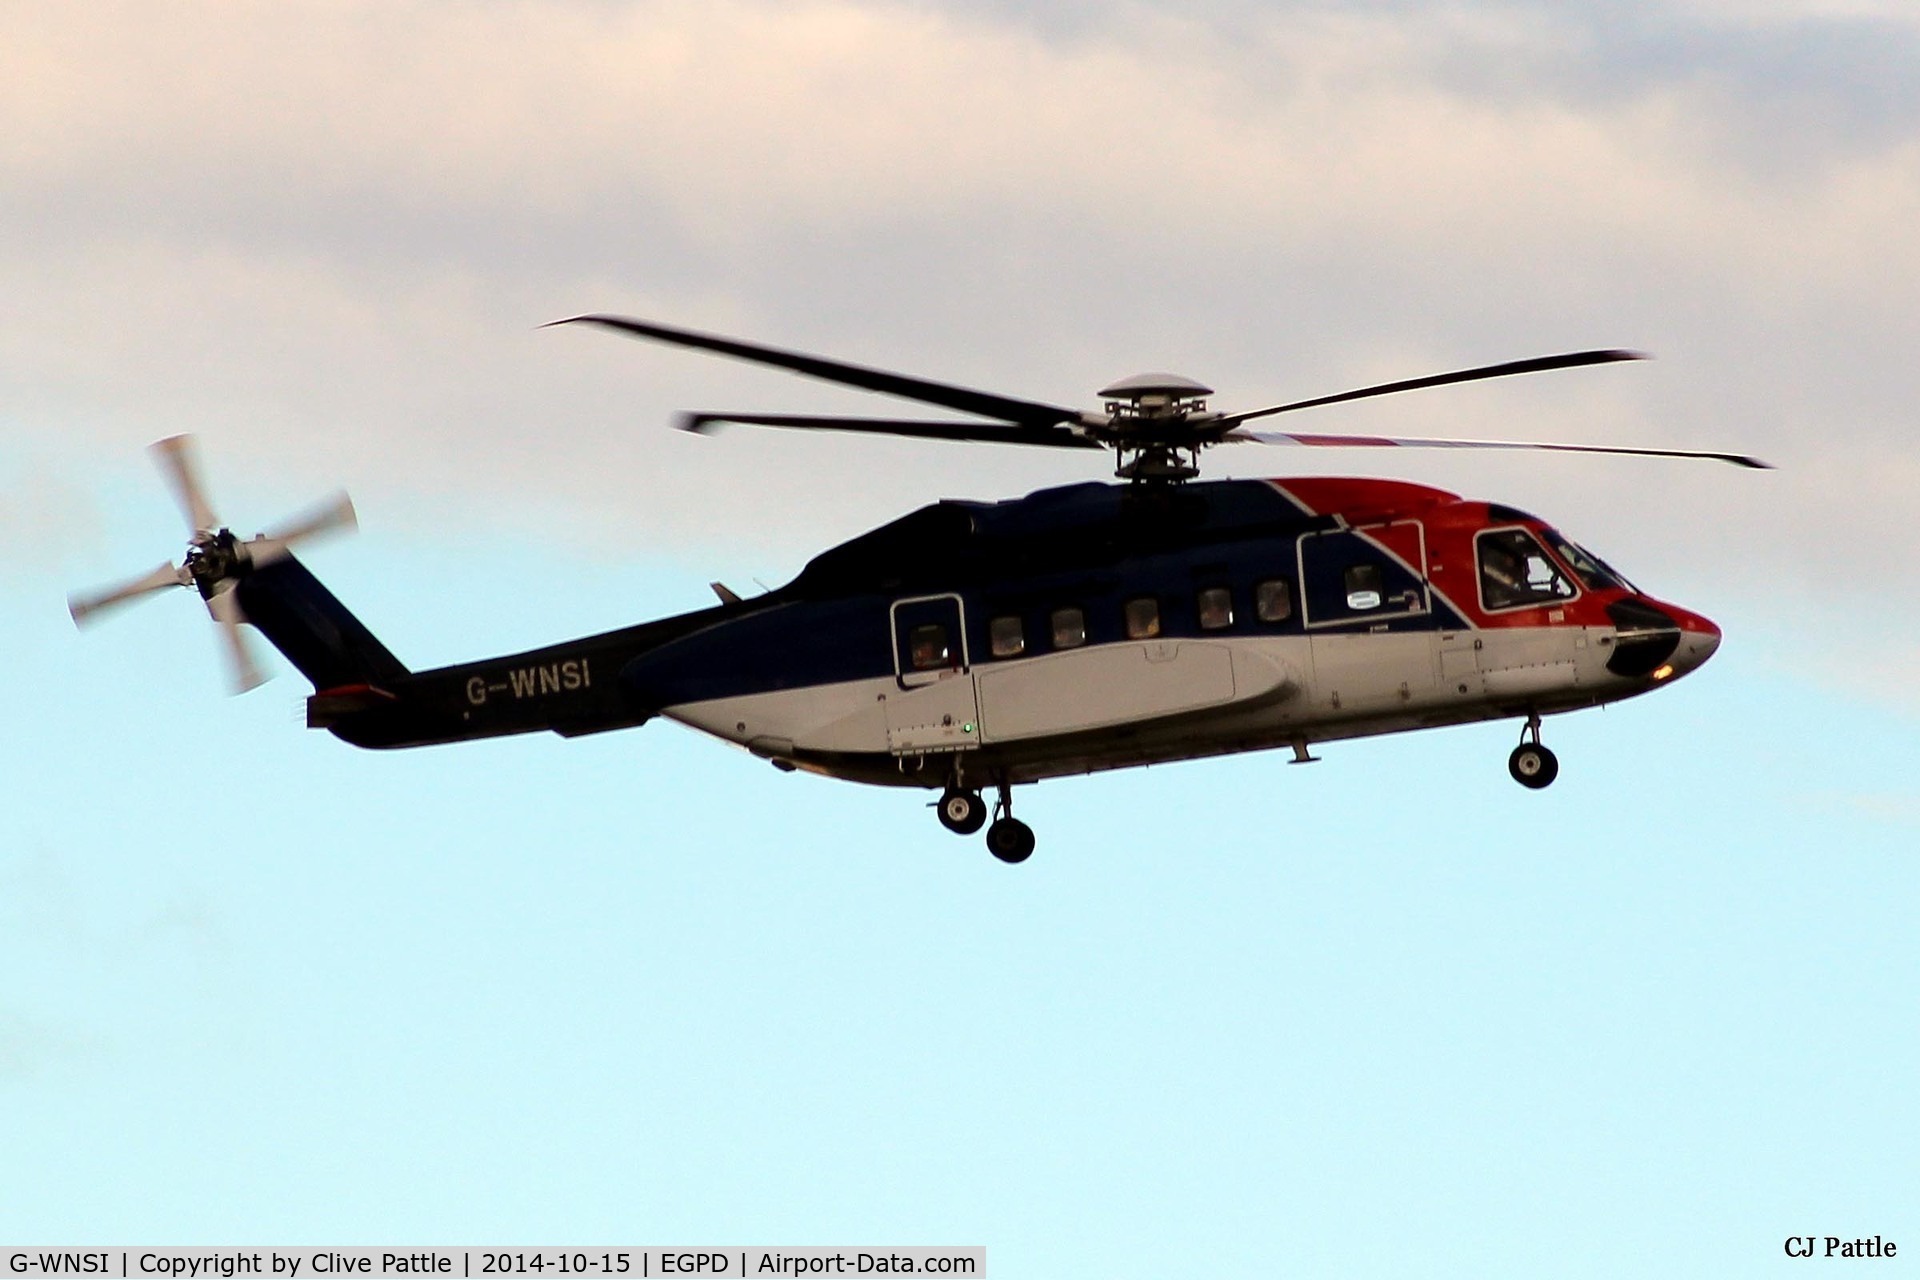 G-WNSI, 2005 Sikorsky S-92A C/N 920024, On finals for landing at Aberdeen EGPD